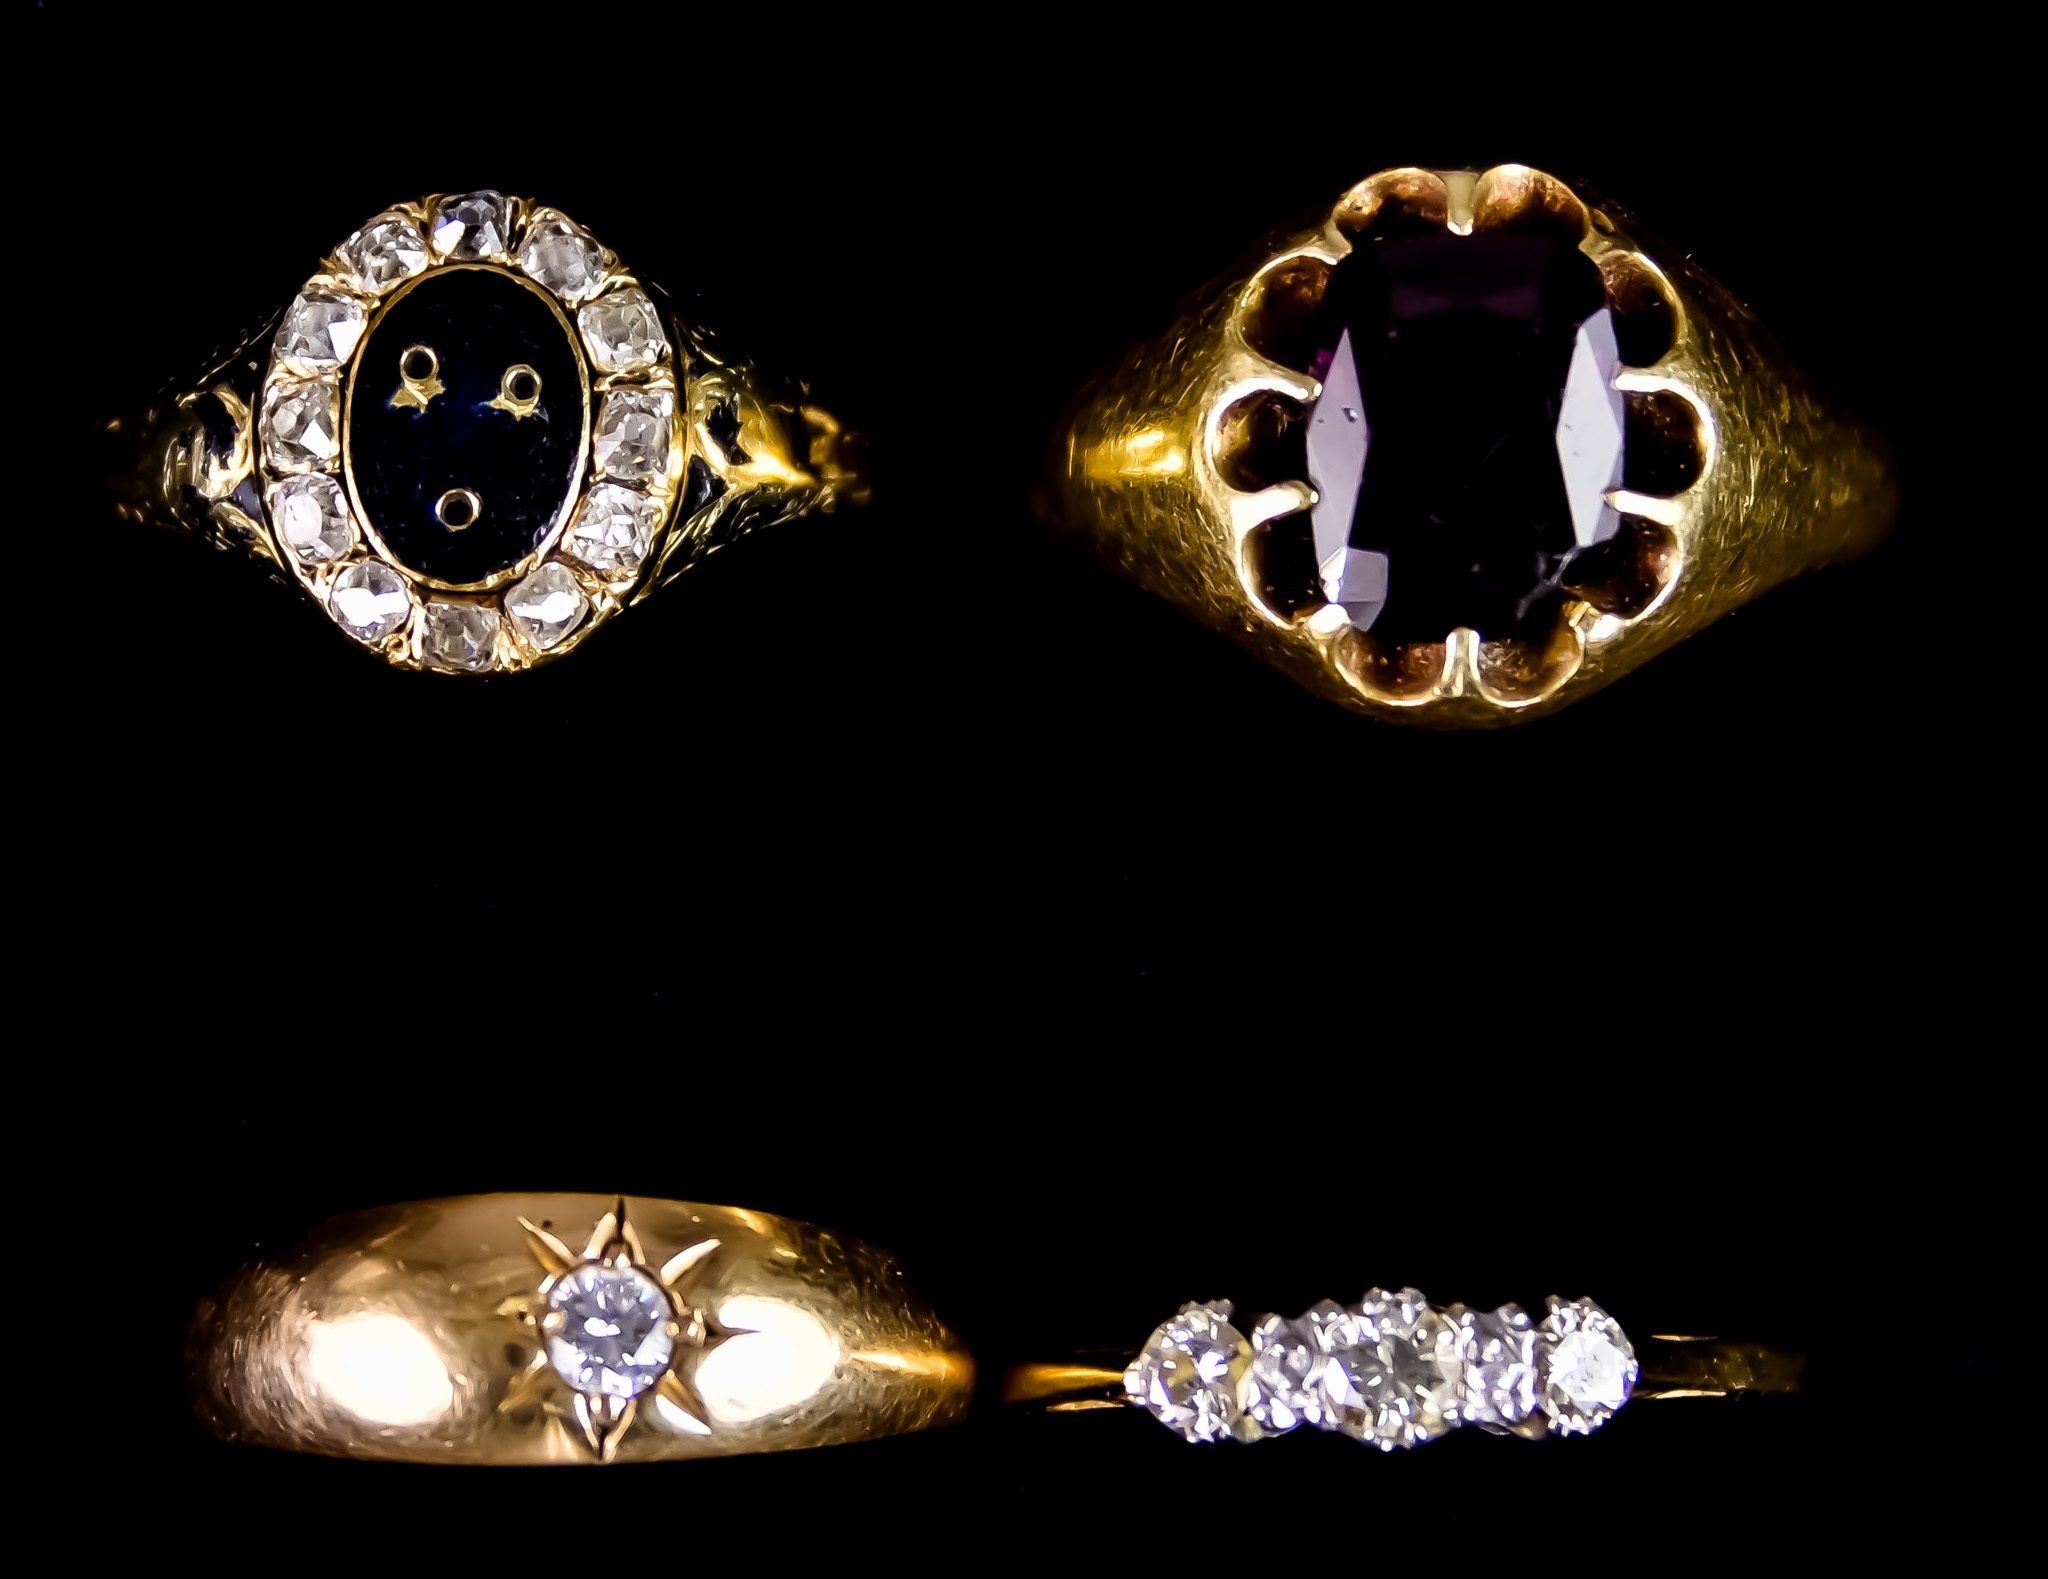 Four 18ct Gold Gem Set rings, comprising - one gentleman's set with a amethyst stone, size S+, one